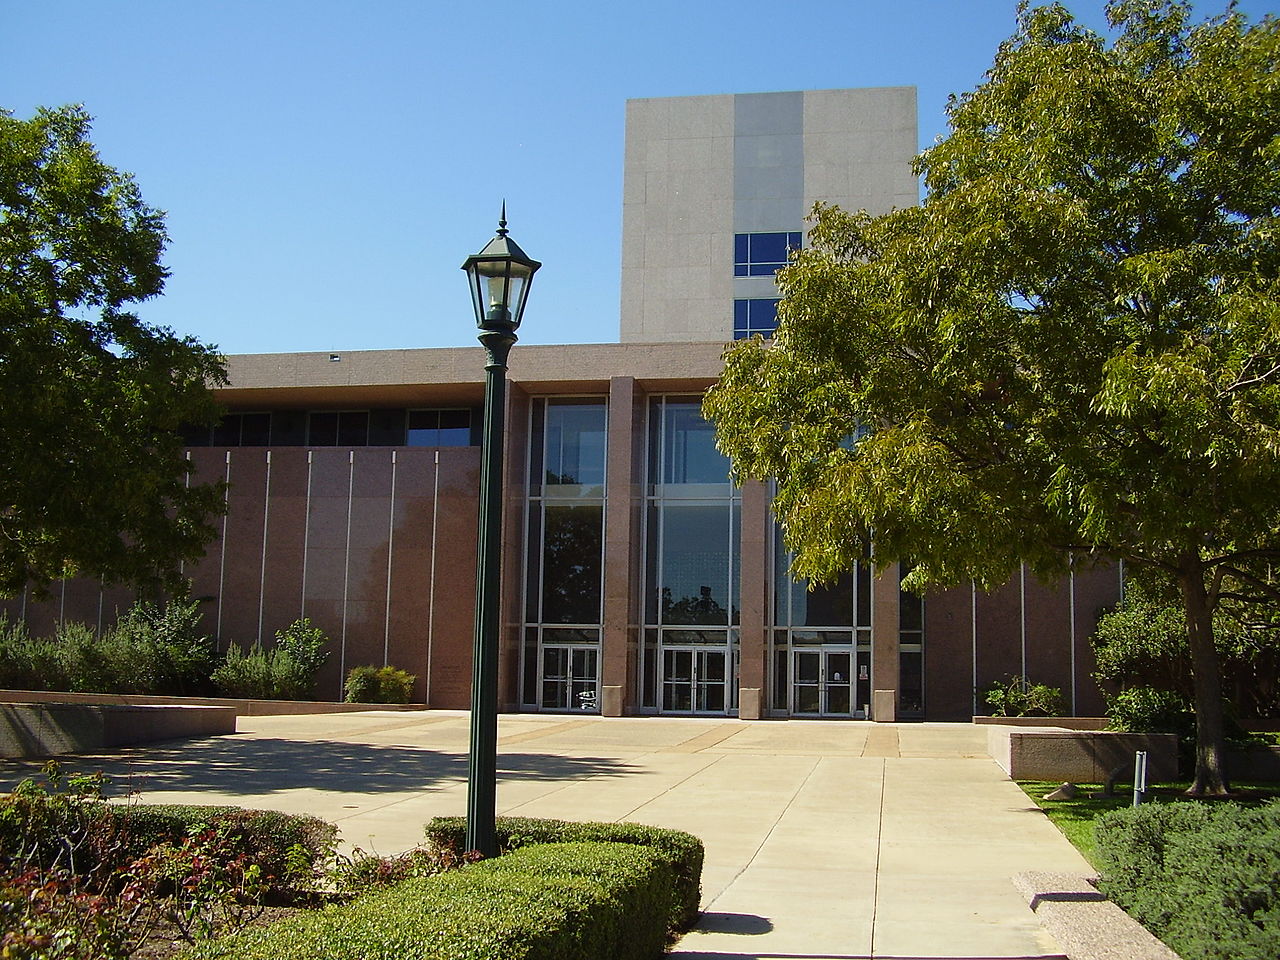 The Texas Supreme Court Building houses the Texas Court of Criminal Appeals